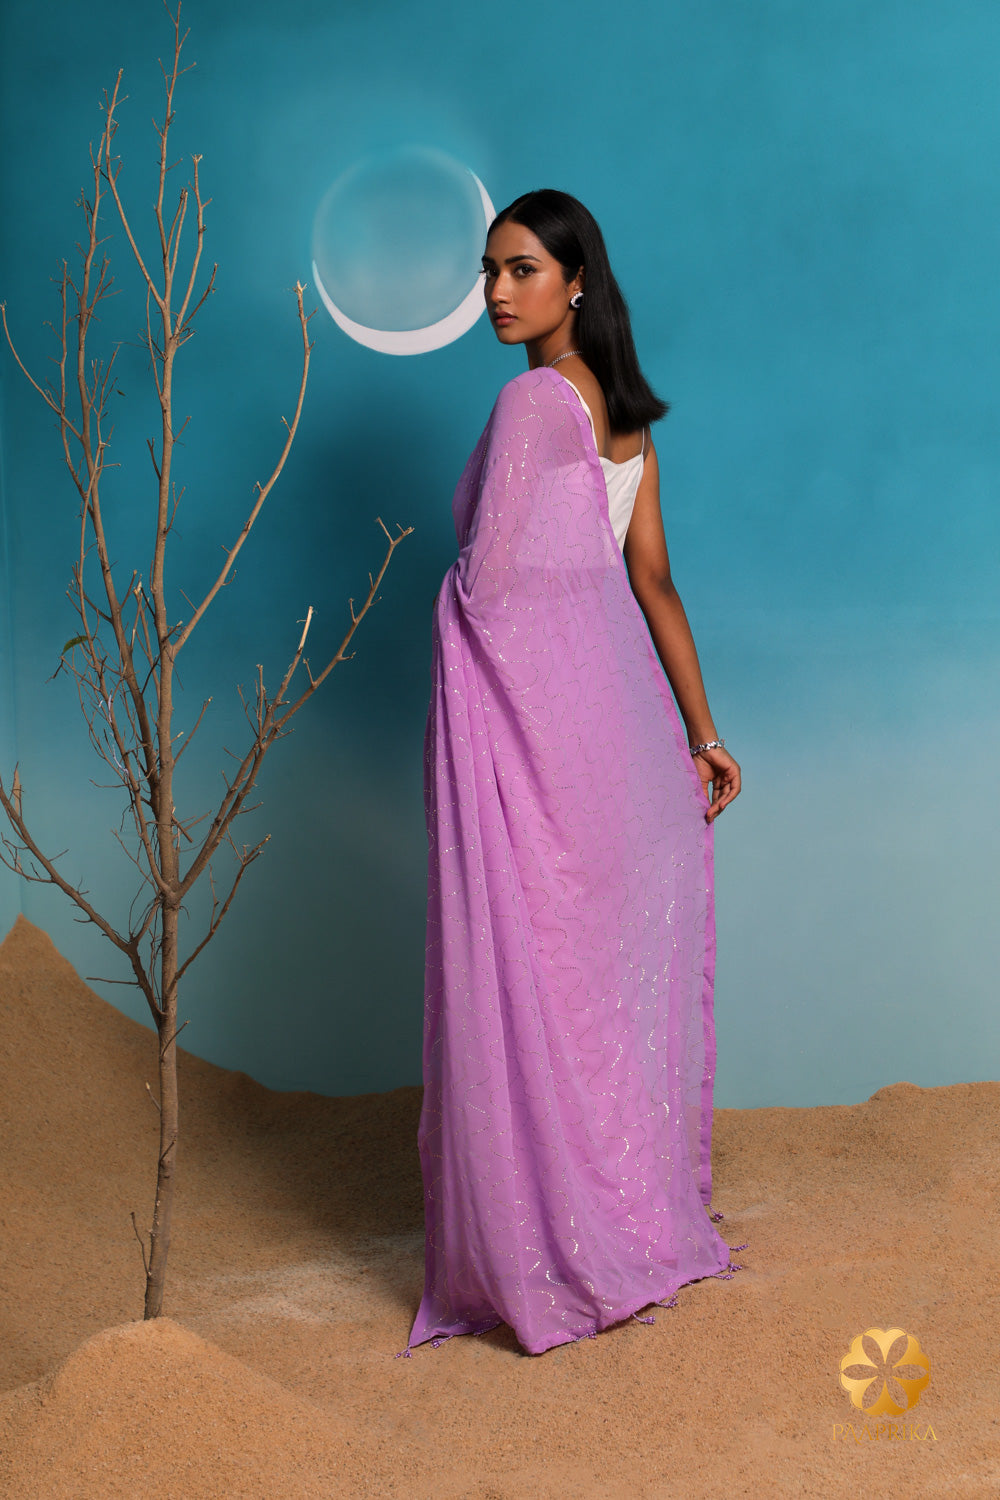 Stunning georgette saree in lavender ombre with waves design and shimmering mukaish embroidery - Get yours today!